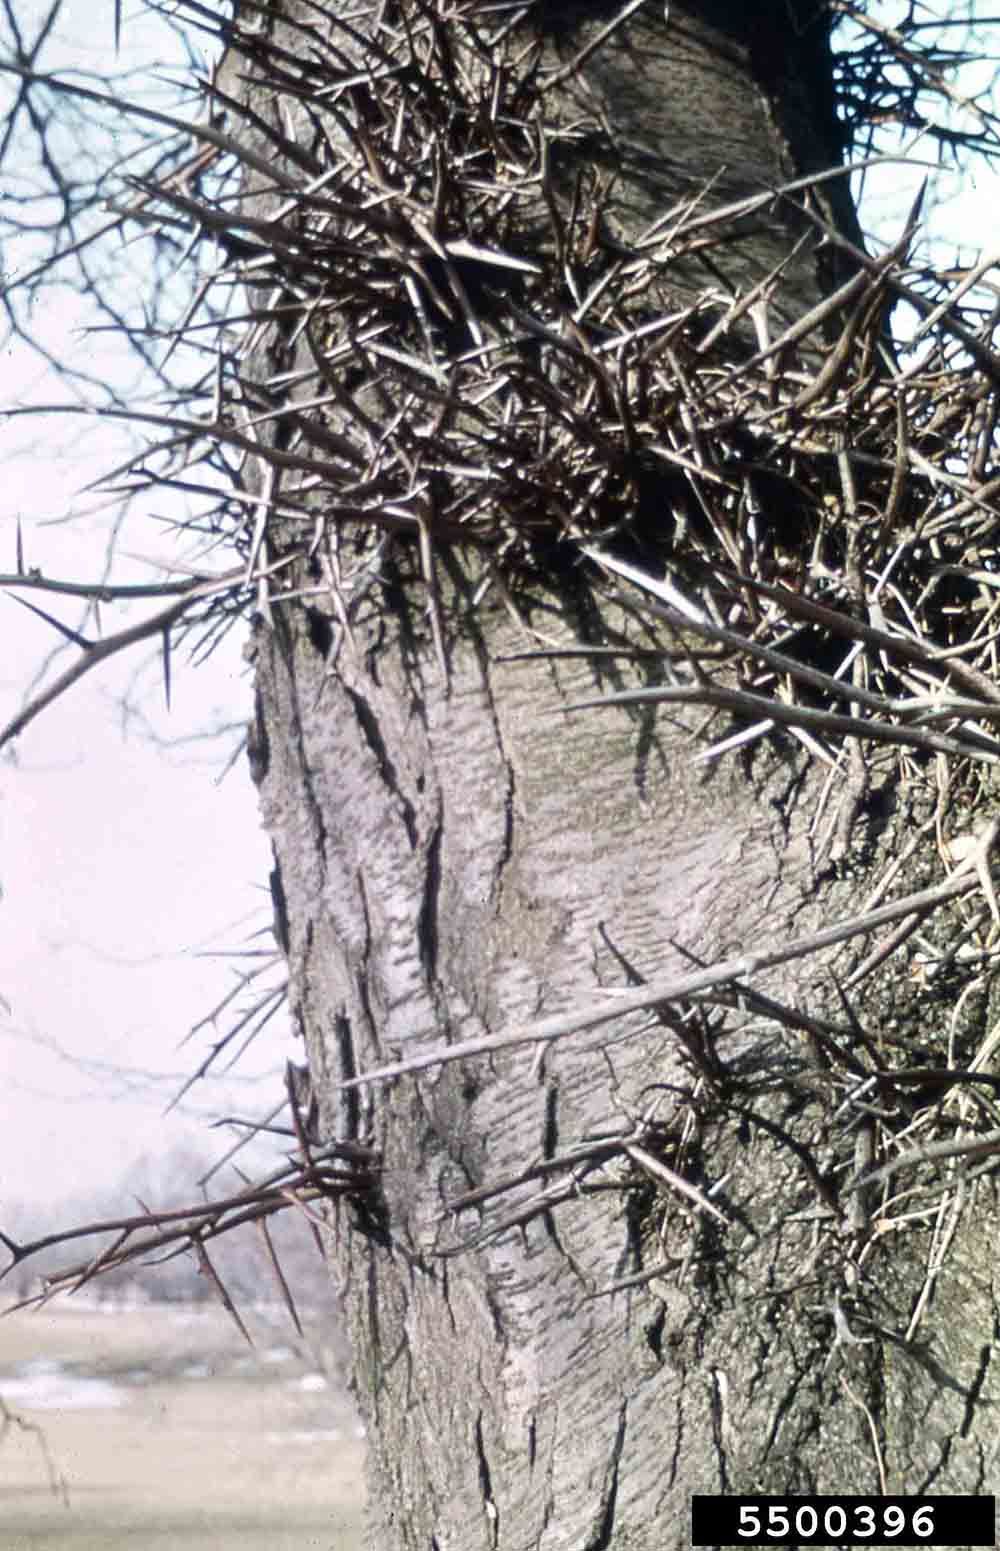 Honey locust trunk with branched thorns